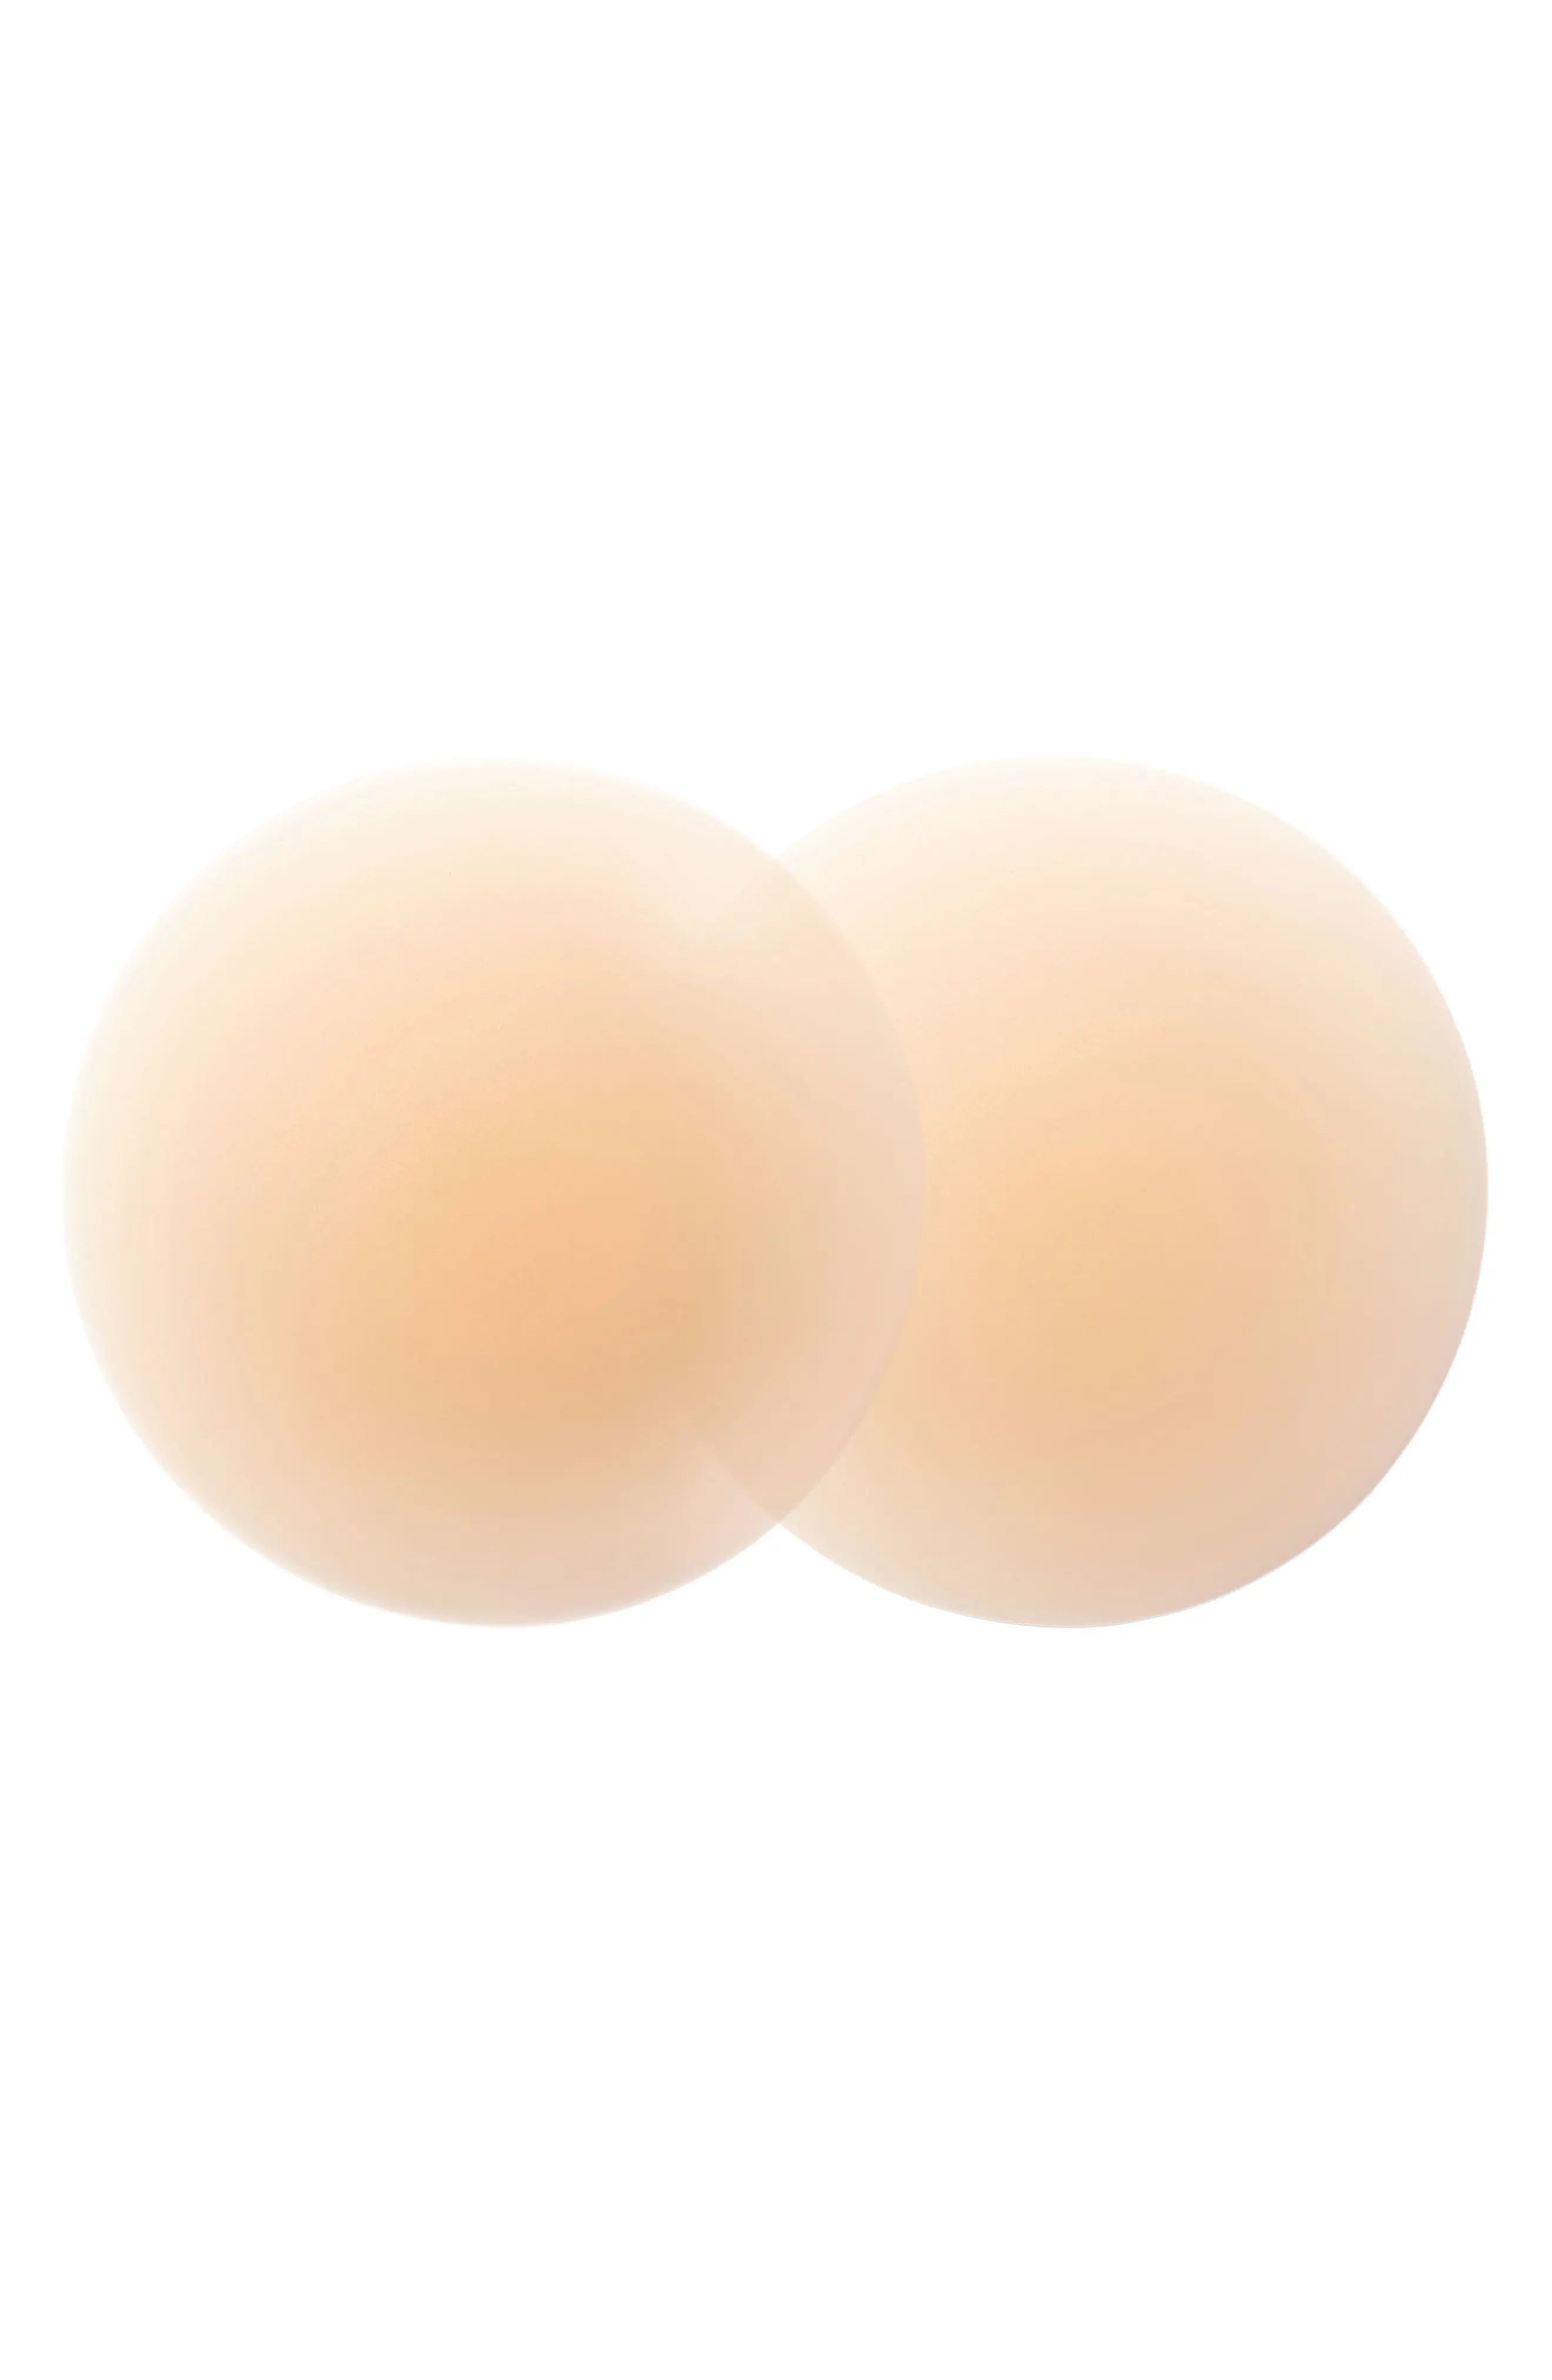 Bristols 6 Nippies by Bristols Six Skin Reusable Adhesive Nipple Covers in Creme at Nordstrom, Size  | Nordstrom